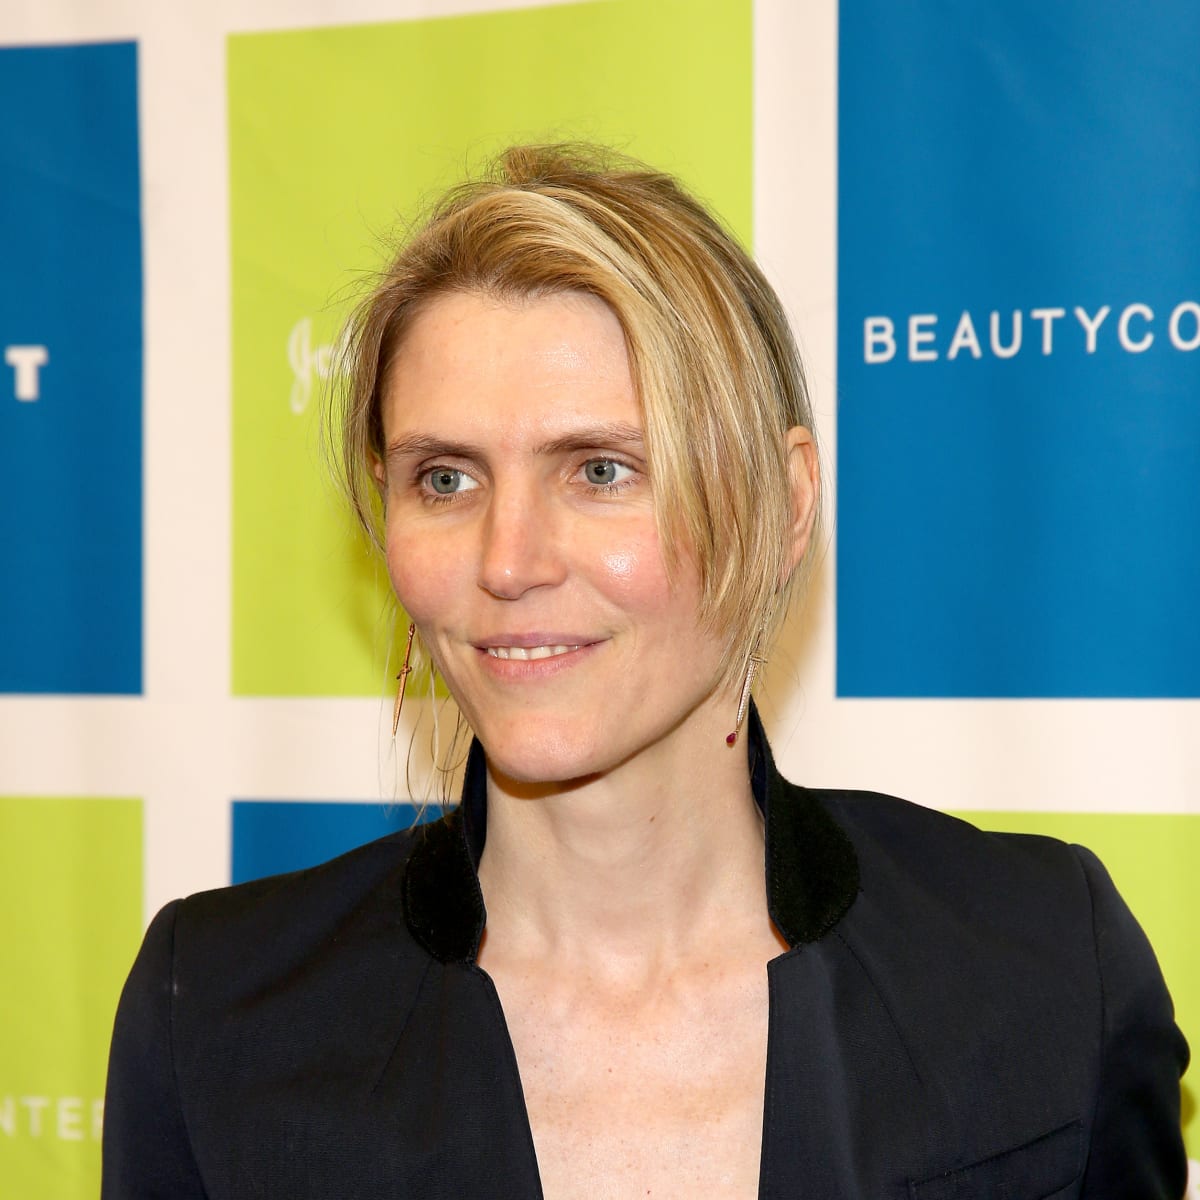 Gabriela Hearst leaves Chloé after three years